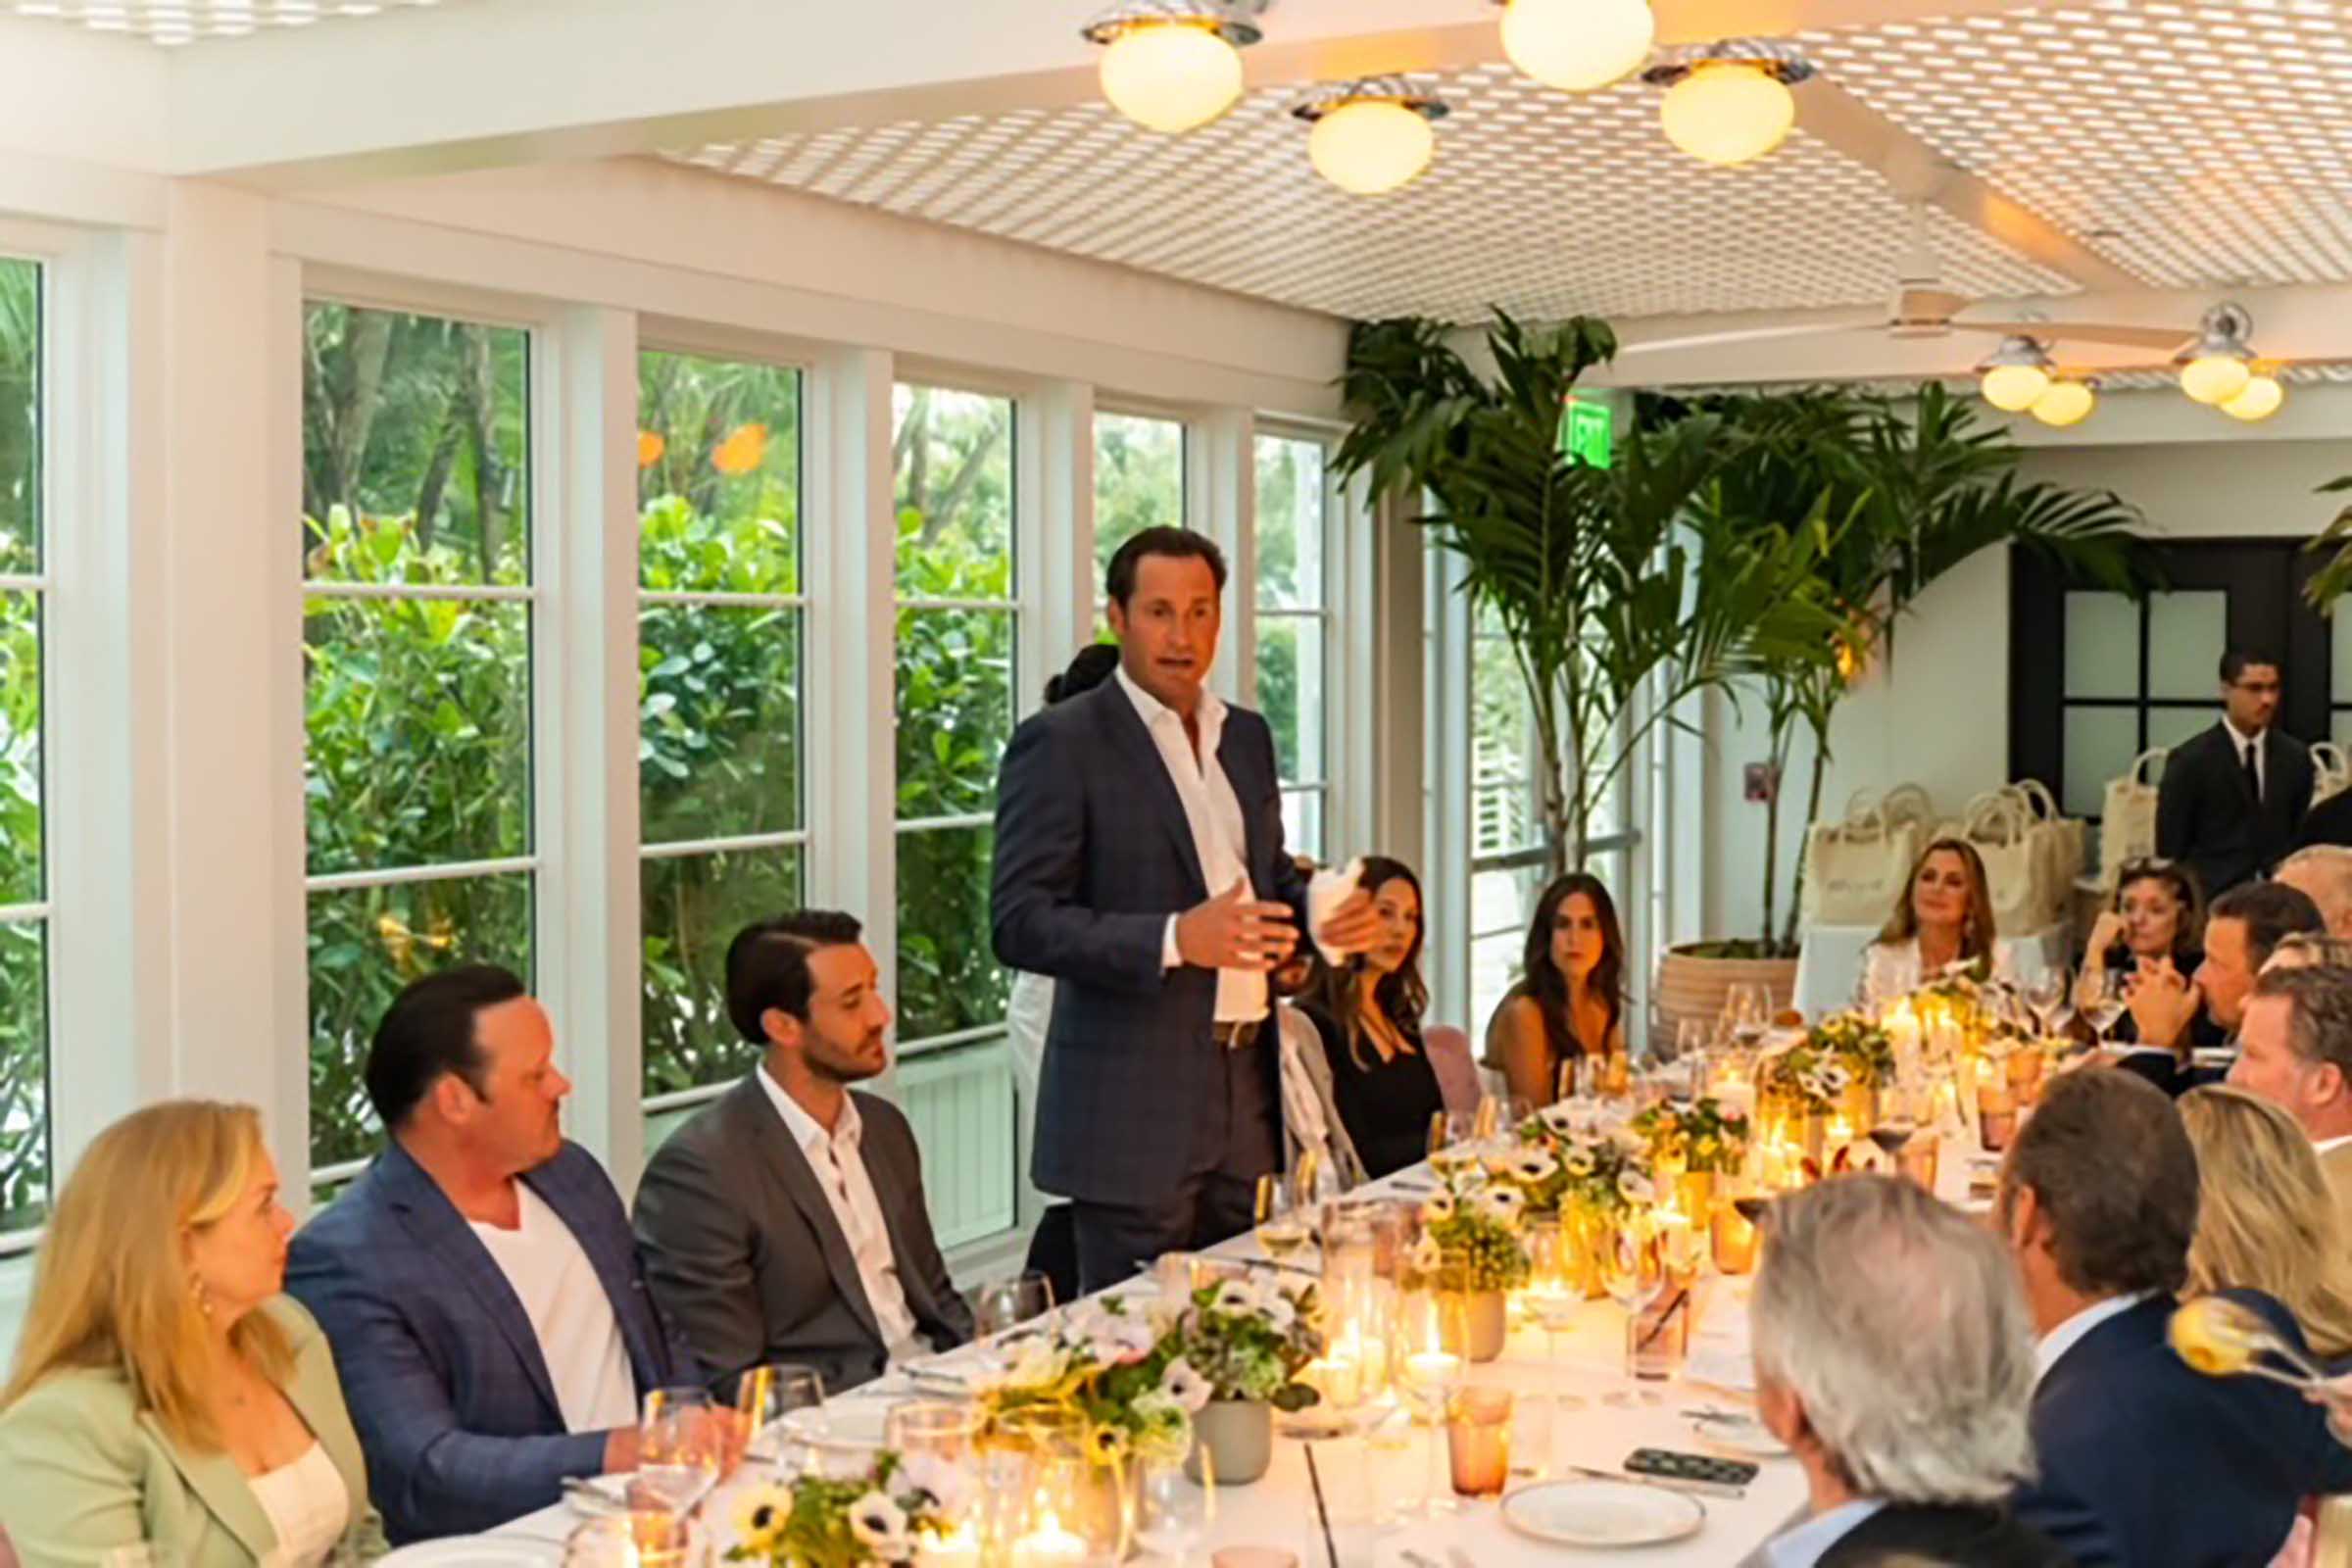 Rivage Bal Harbour Hosts Private Dinner Presentation For Top Brokers